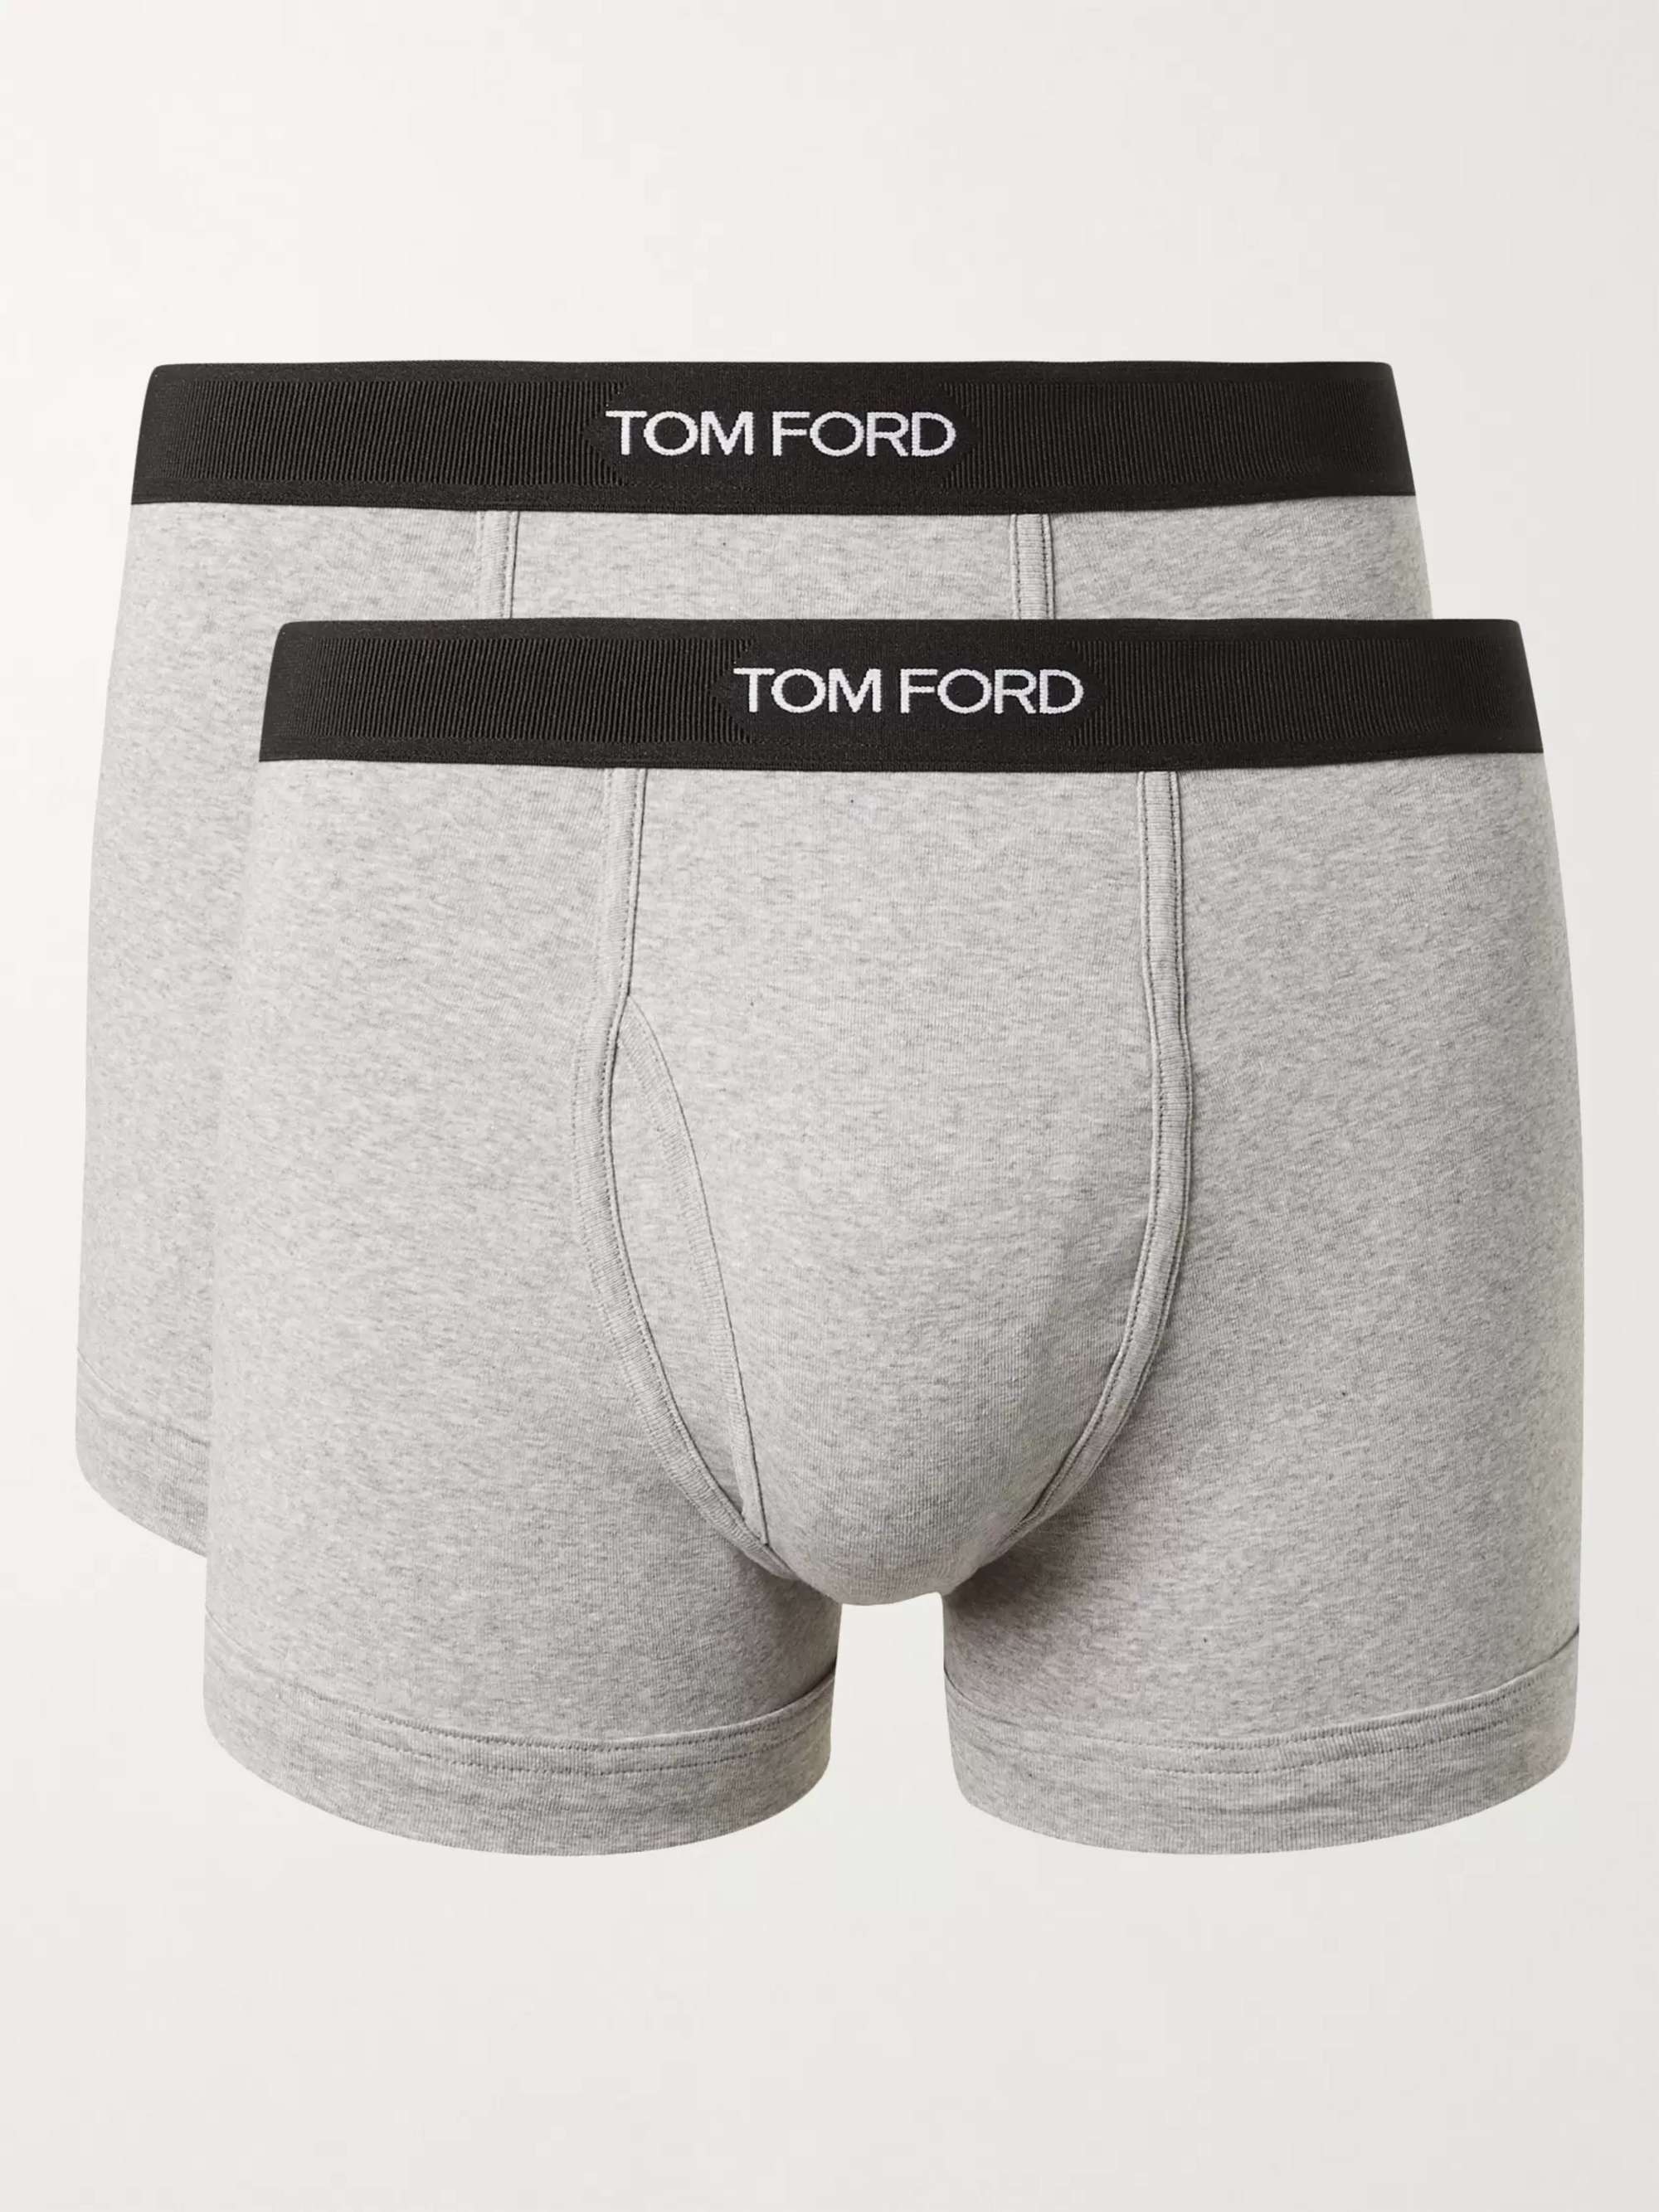 Tom Ford Cotton Two-pack Logo Briefs in Grey Grey for Men Mens Clothing Underwear Boxers briefs 